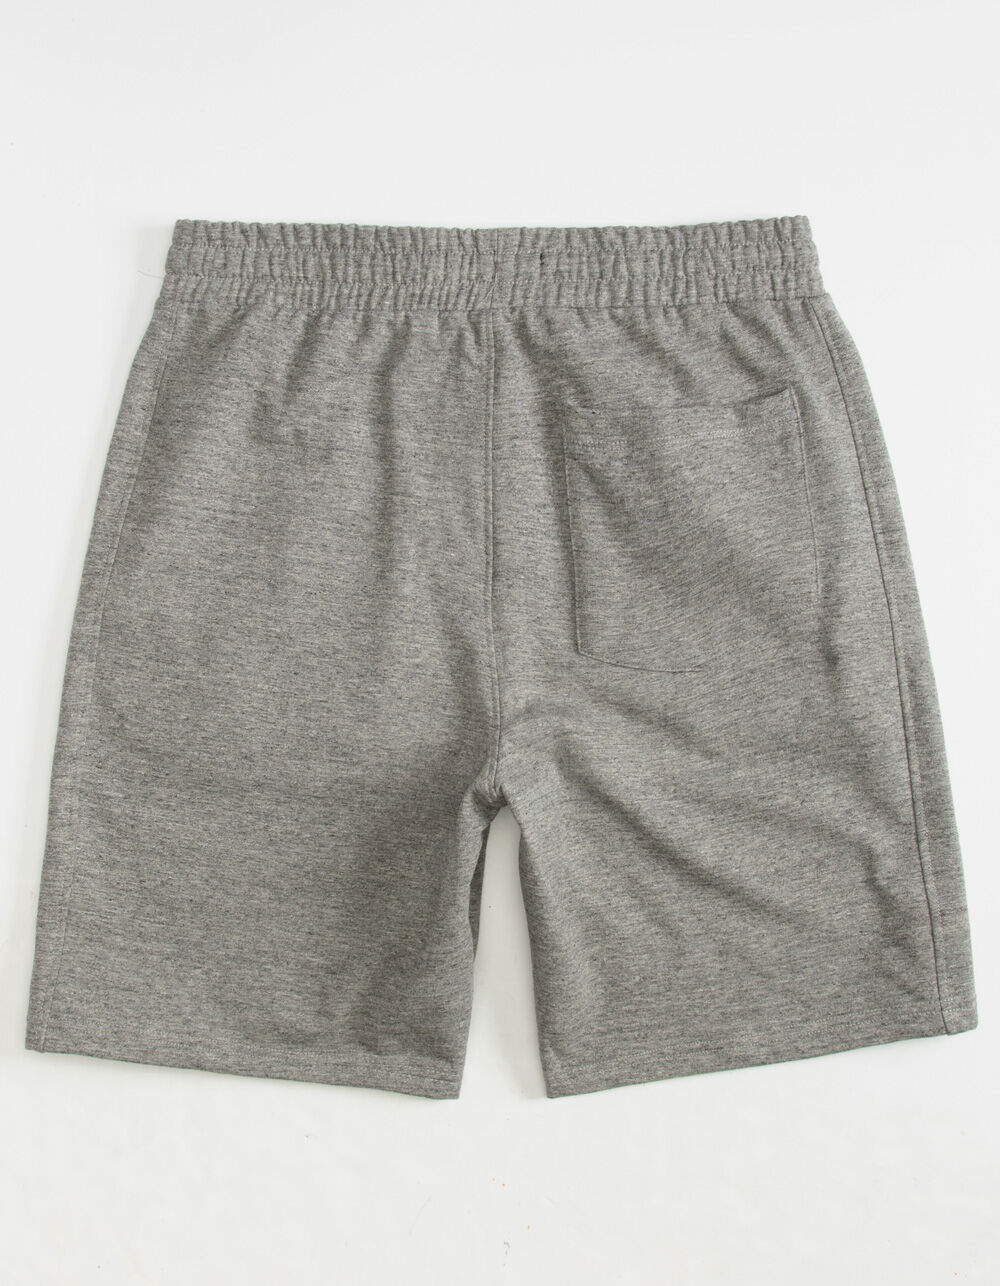 | RSQ Tillys Mens - Sweat Shorts Gray HEATHER Heather GRAY